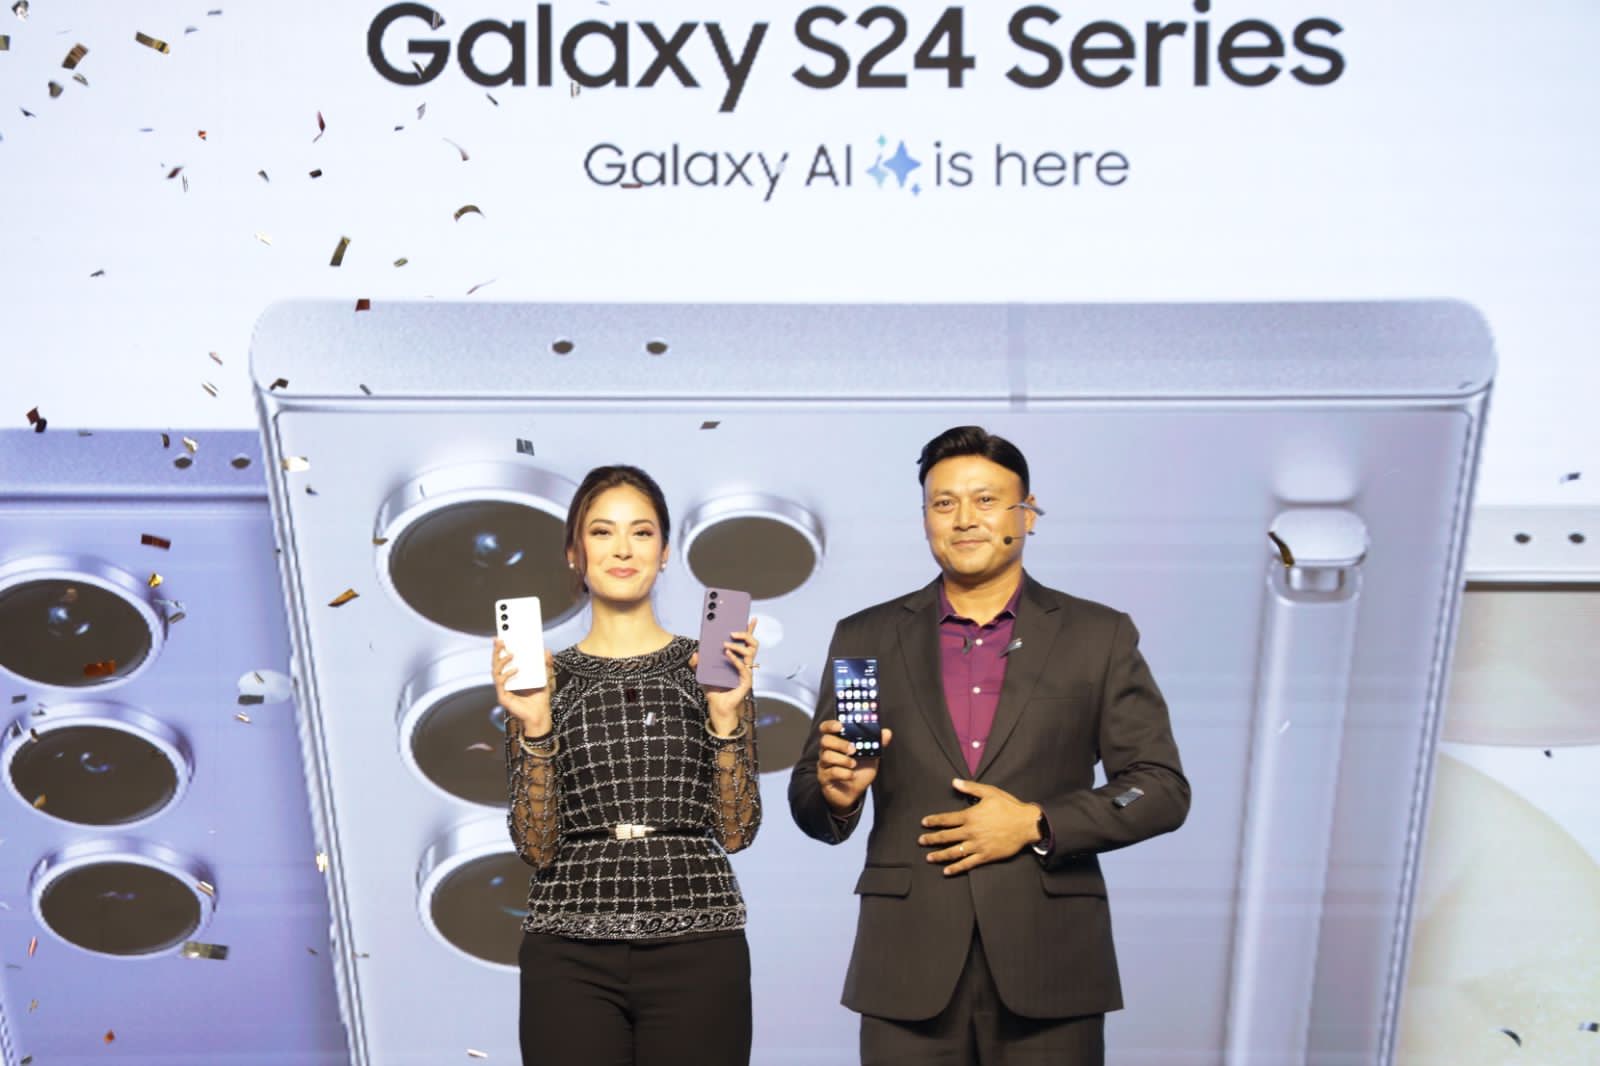 Samsung launches the New Era of Mobile AI with Samsung Galaxy S24 Series